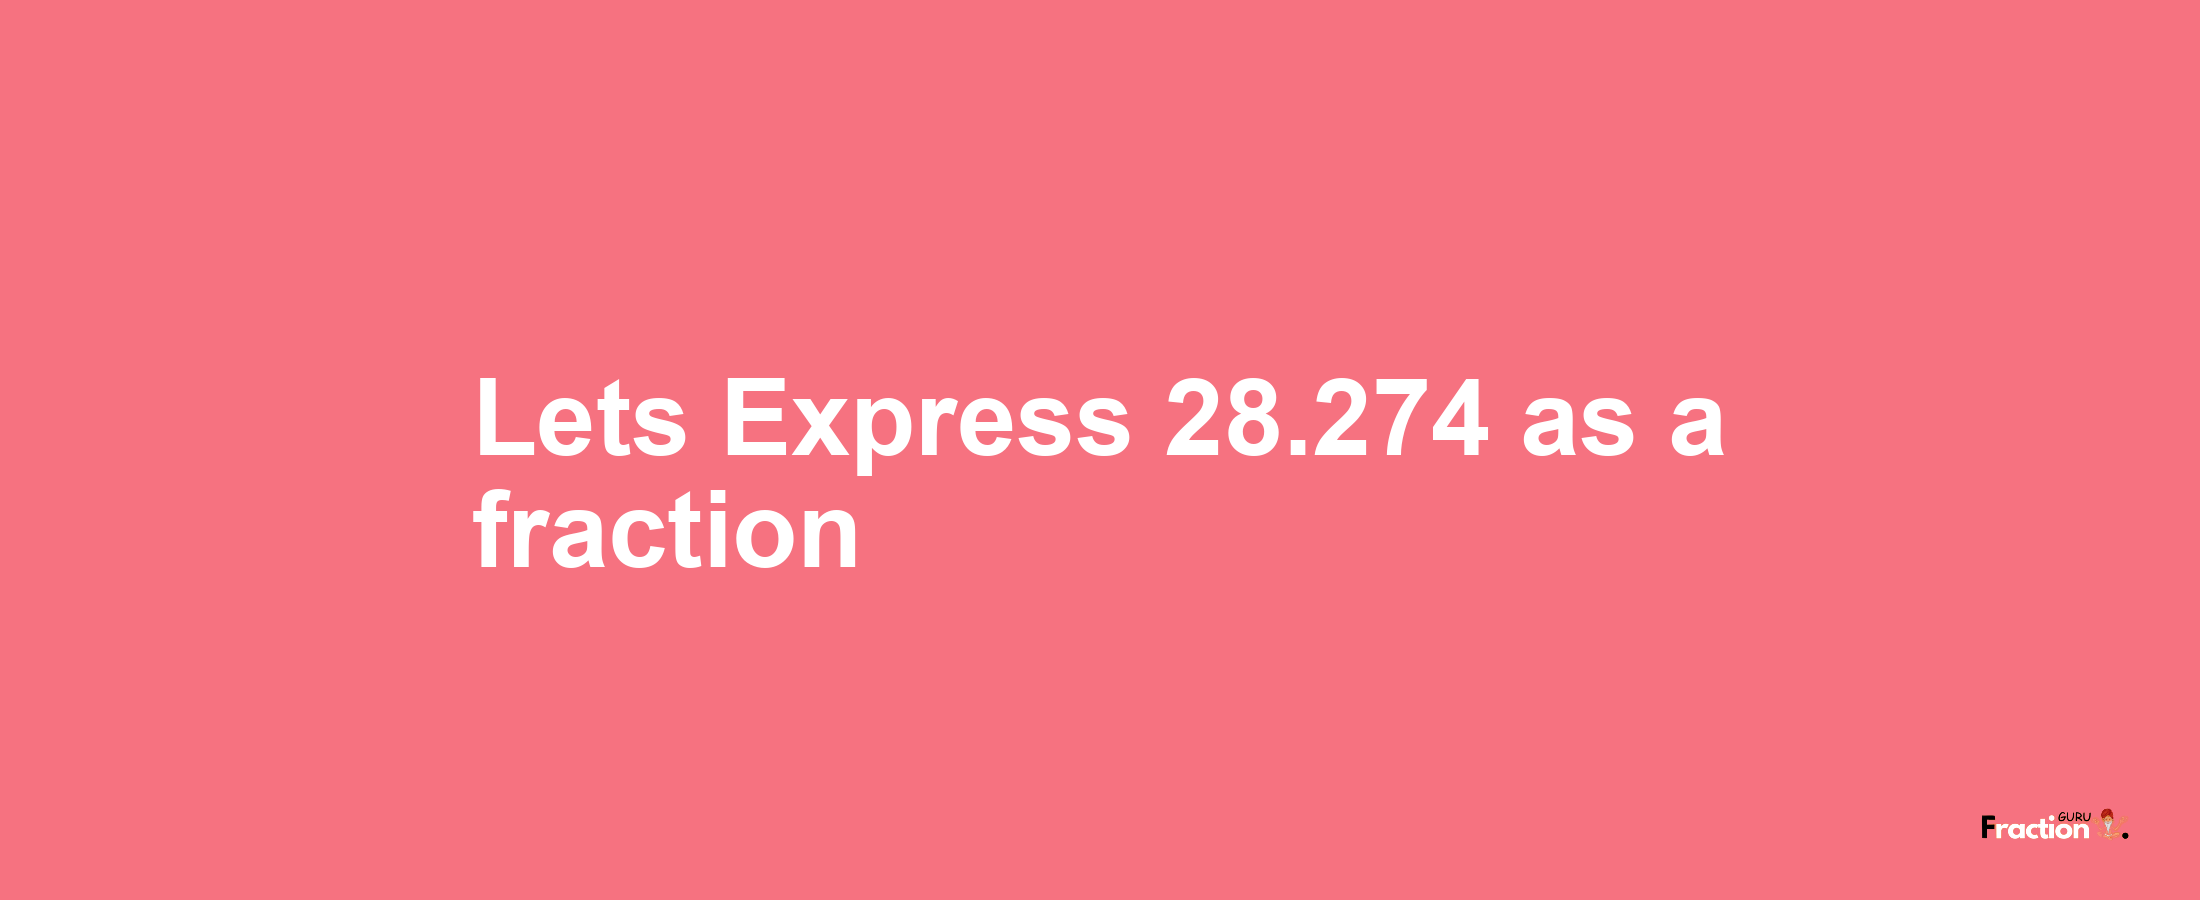 Lets Express 28.274 as afraction